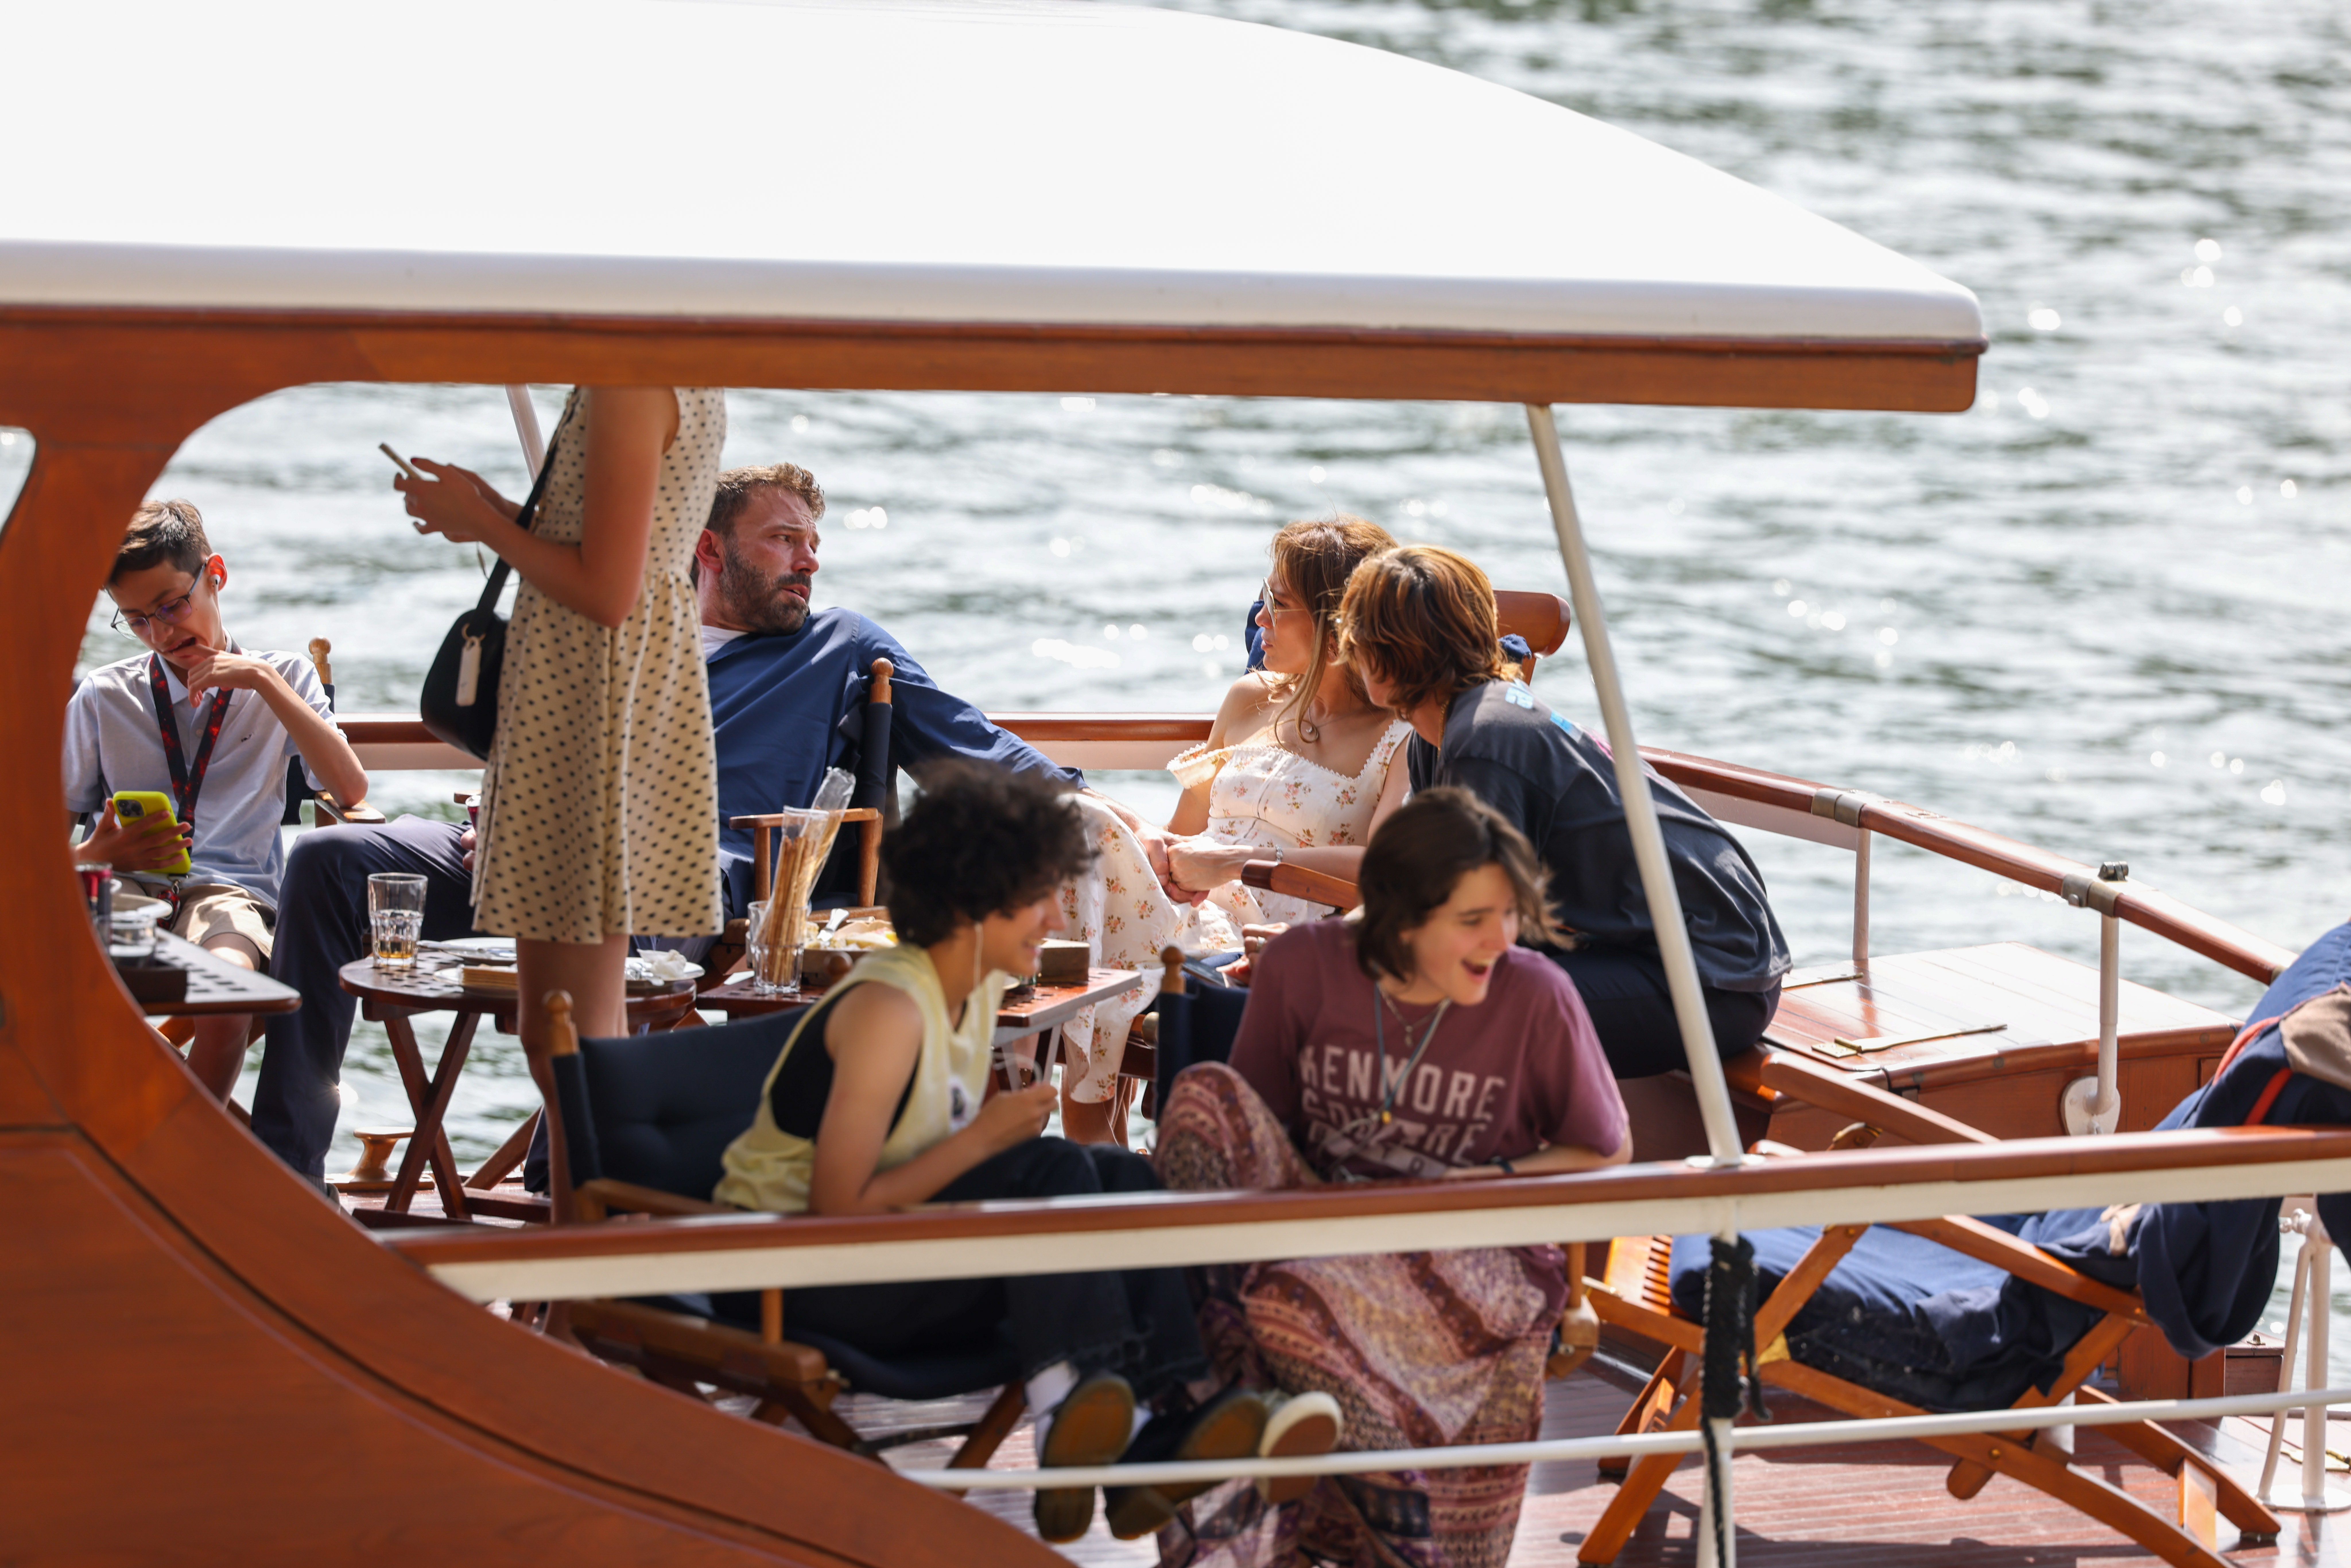 Jennifer Lopez and Ben Affleck take a cruise on the River Seine along with some of their children, Seraphina Affleck (front R) and Emme Muniz (front L) on July 23, 2022, in Paris, France. | Source: Getty Images